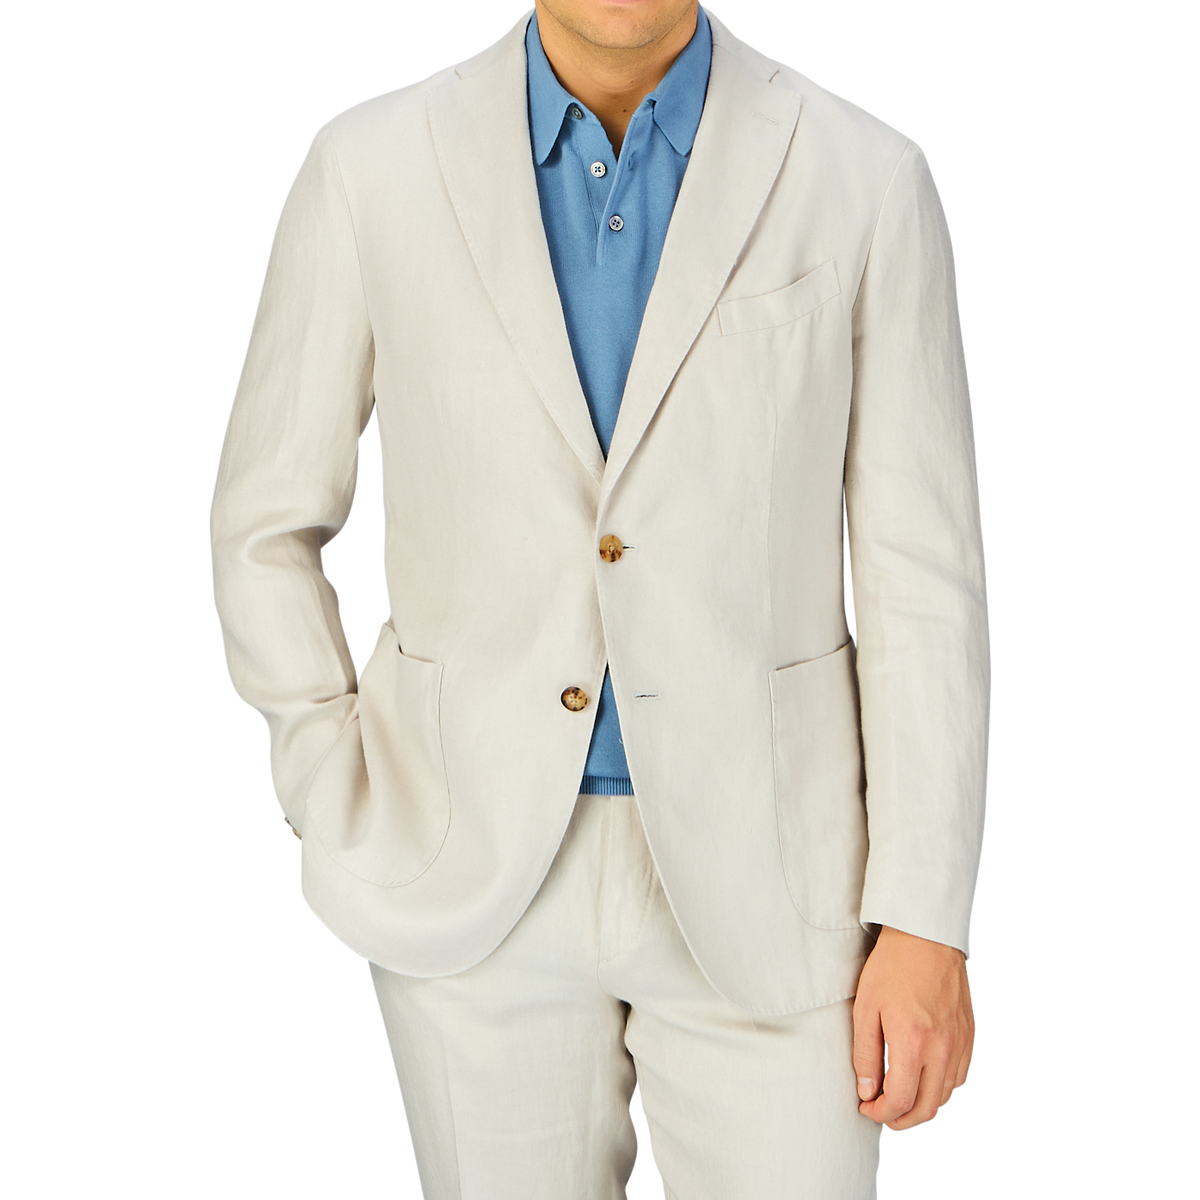 A man wearing a Light Beige Washed Irish Linen K Jacket from Boglioli, unstructured in its craftsmanship, with a blue shirt buttoned up but without a tie.